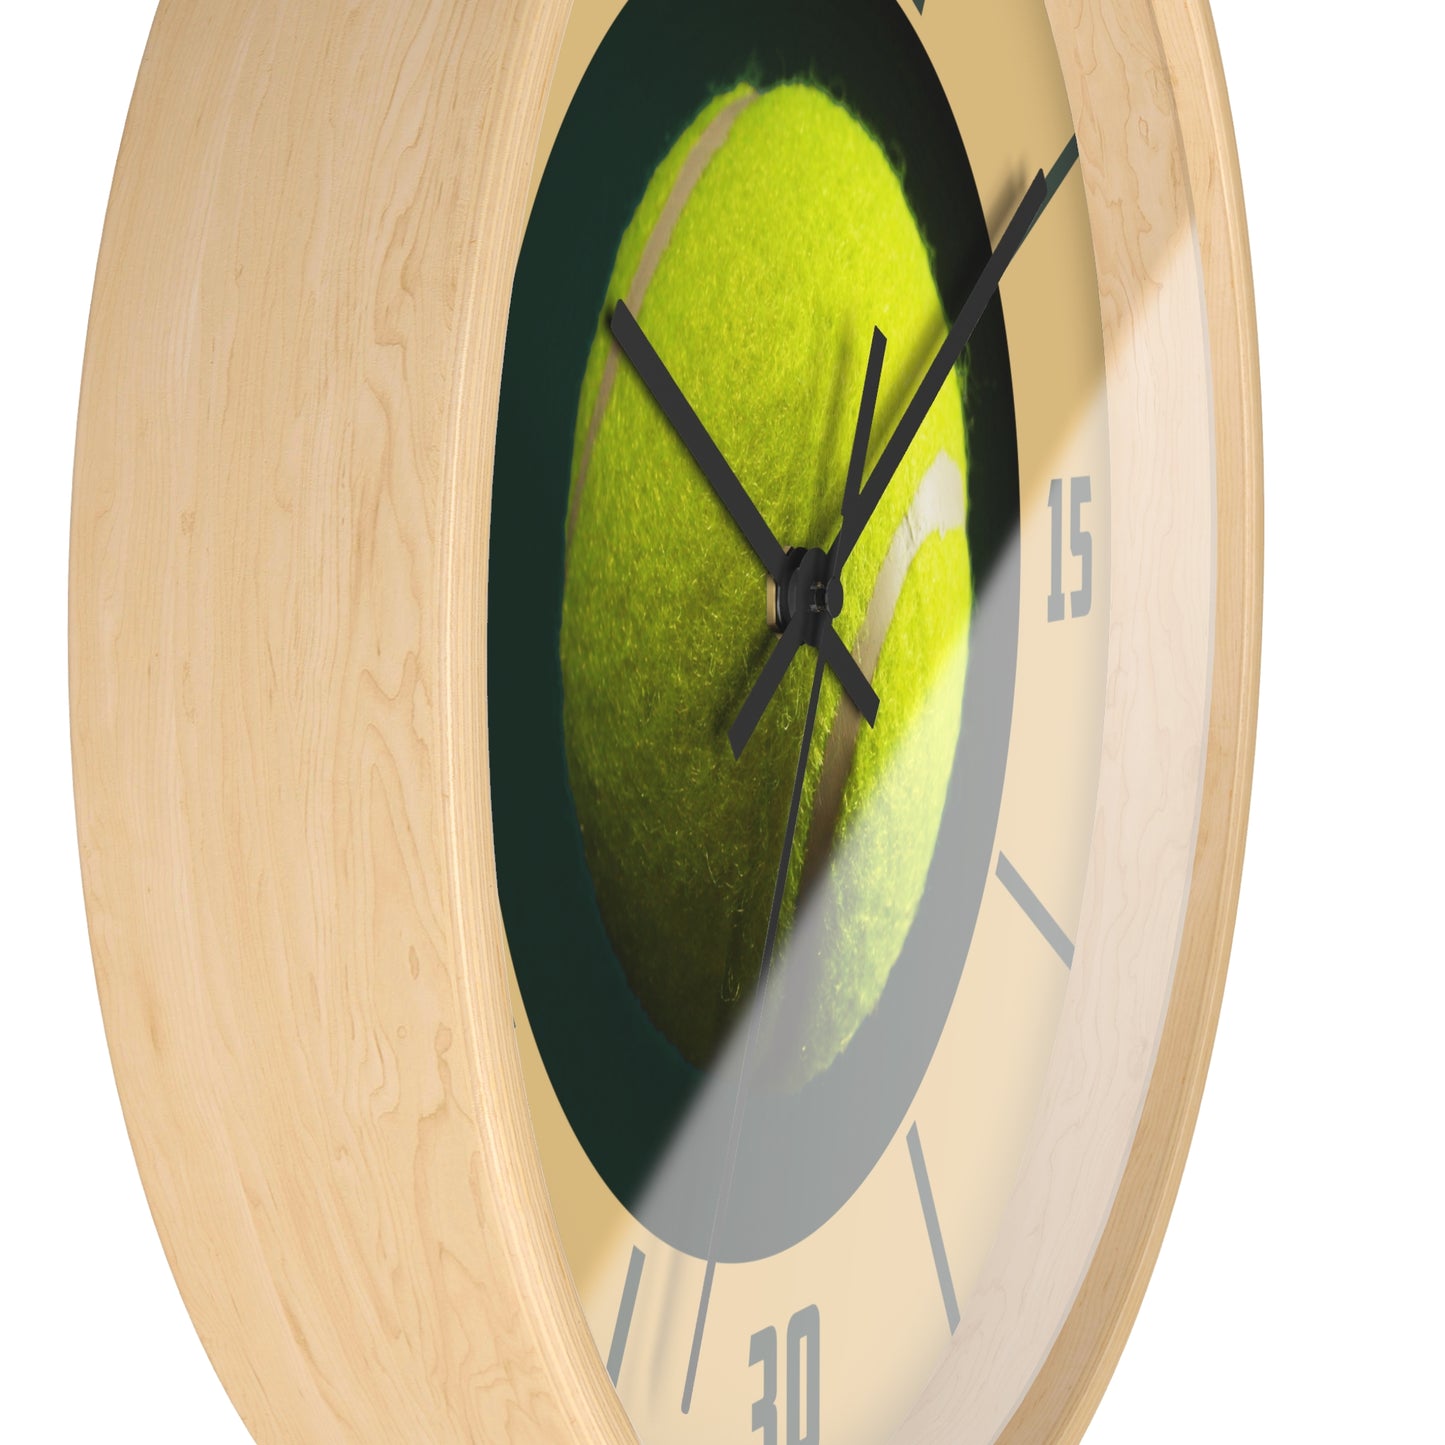 TENNIS CLOCK - 10" Wall Clock, with Tennis Ball, funny gift for Tennis Player, Tennis Club Decor, 2" light wooden frame and plexiglass front